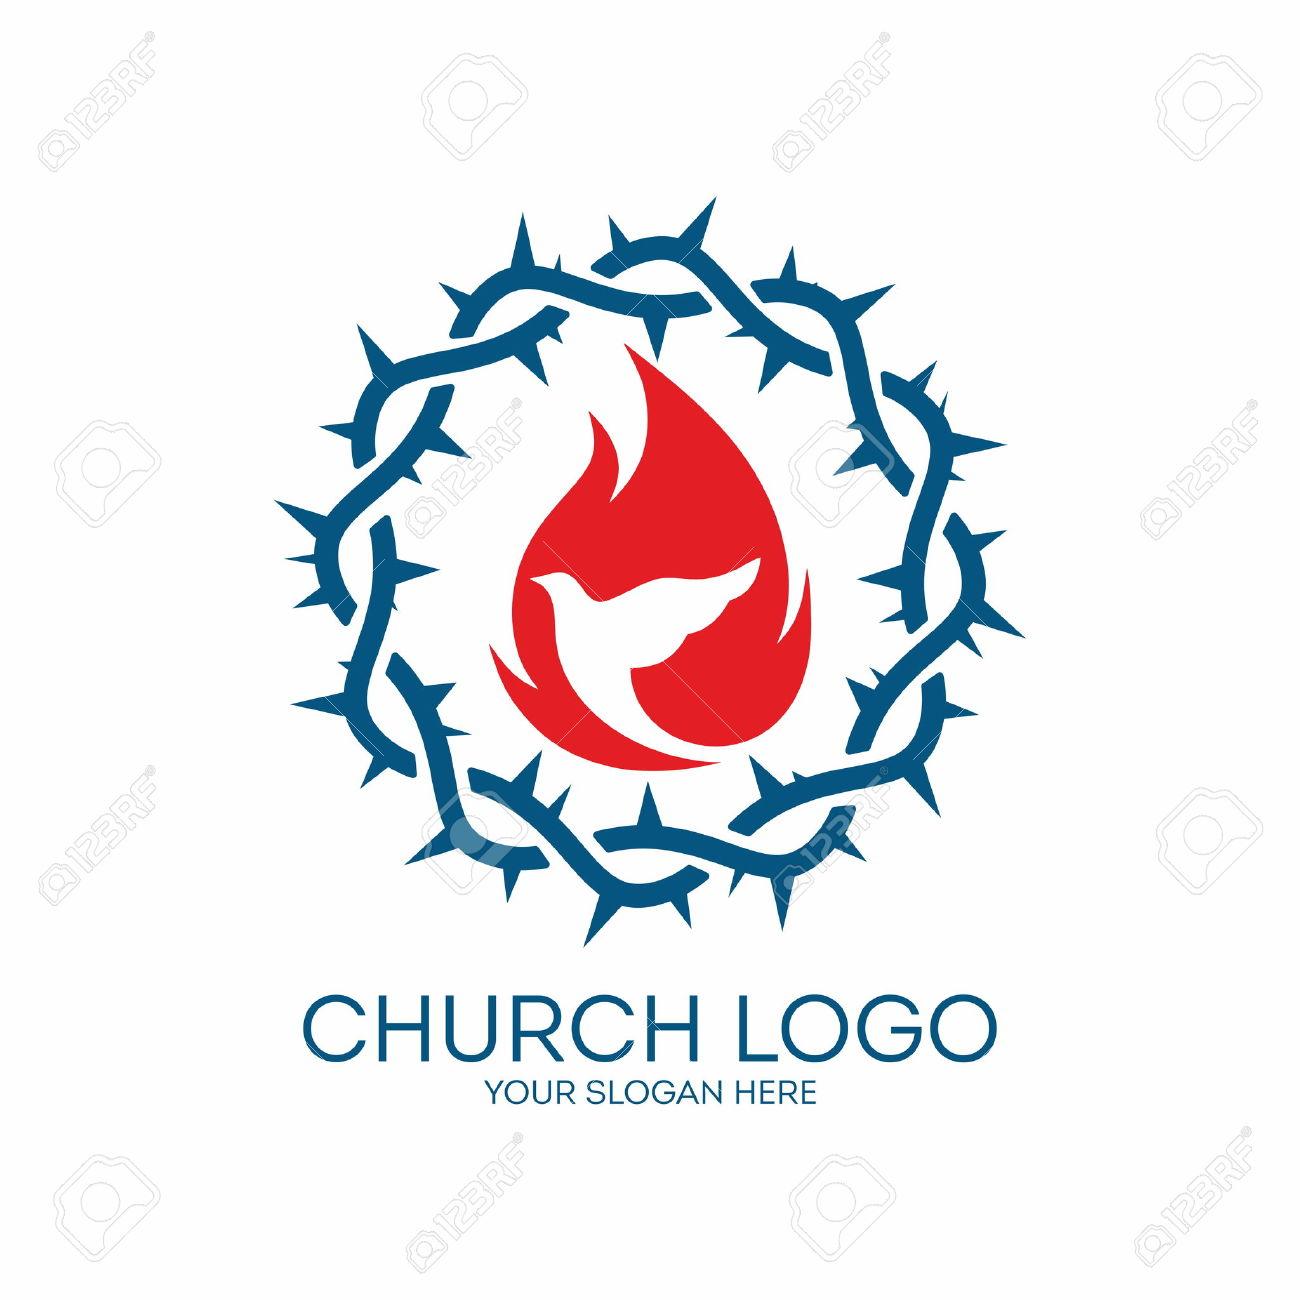 Red and Grey Church Logo - 46668933 Church Logo Crown Of Thorns Blue Red Dove Flames Icon Stock